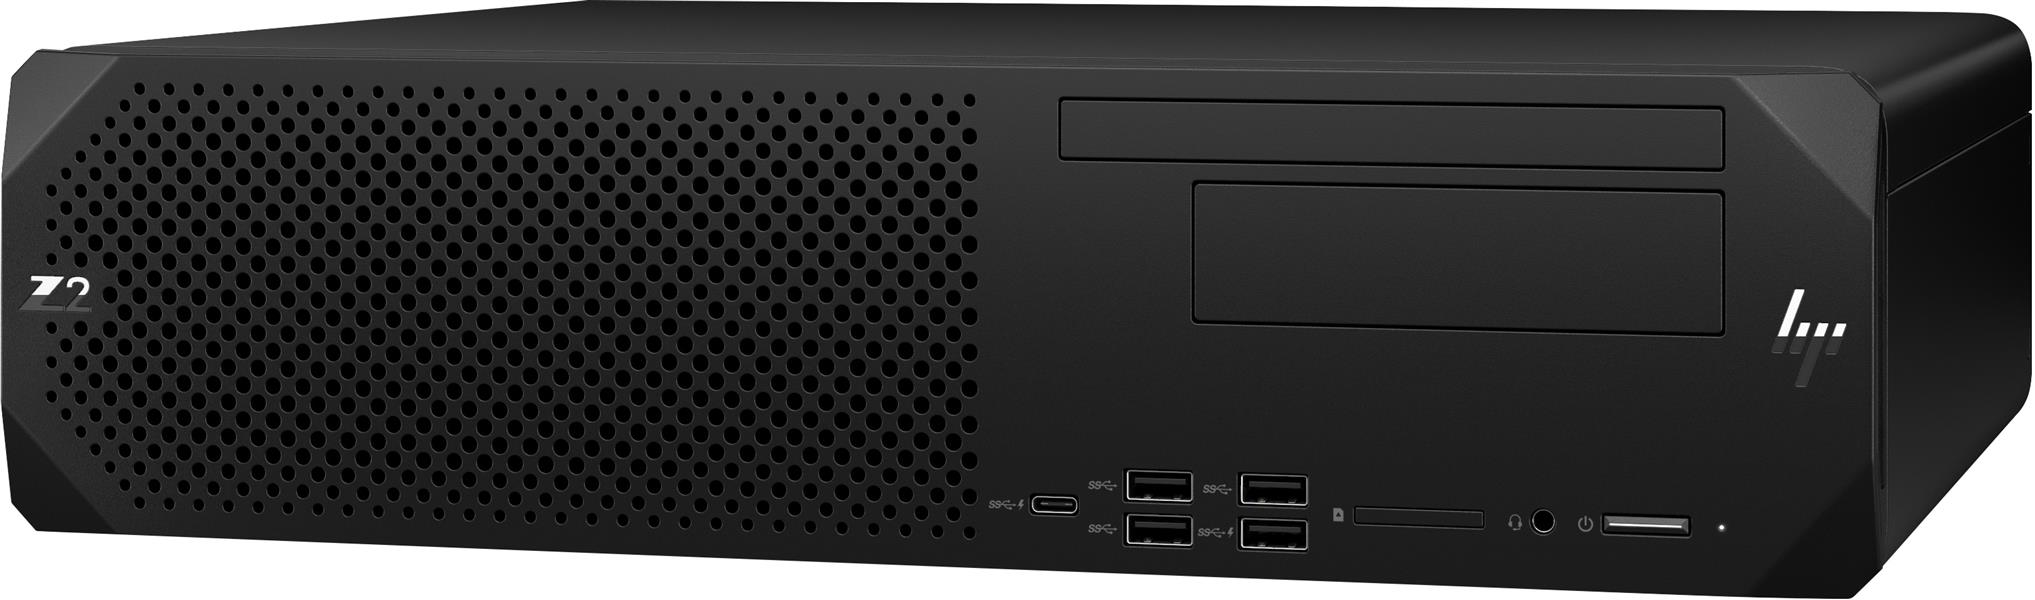 HP Z2 small form factor G9 workstation